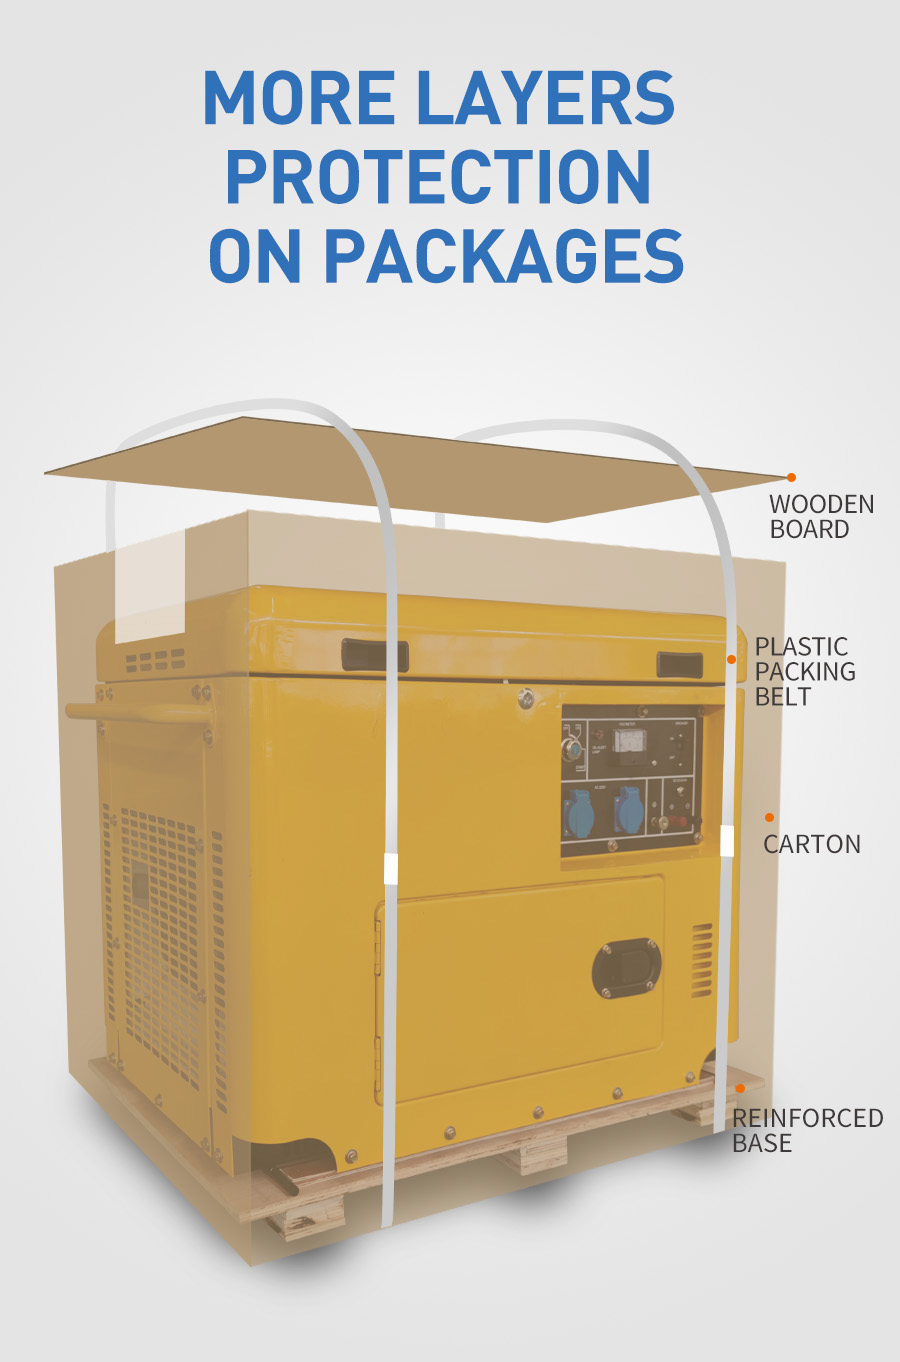 SOUND-PROOF AND MOVEABLE DIESEL GENSET0107